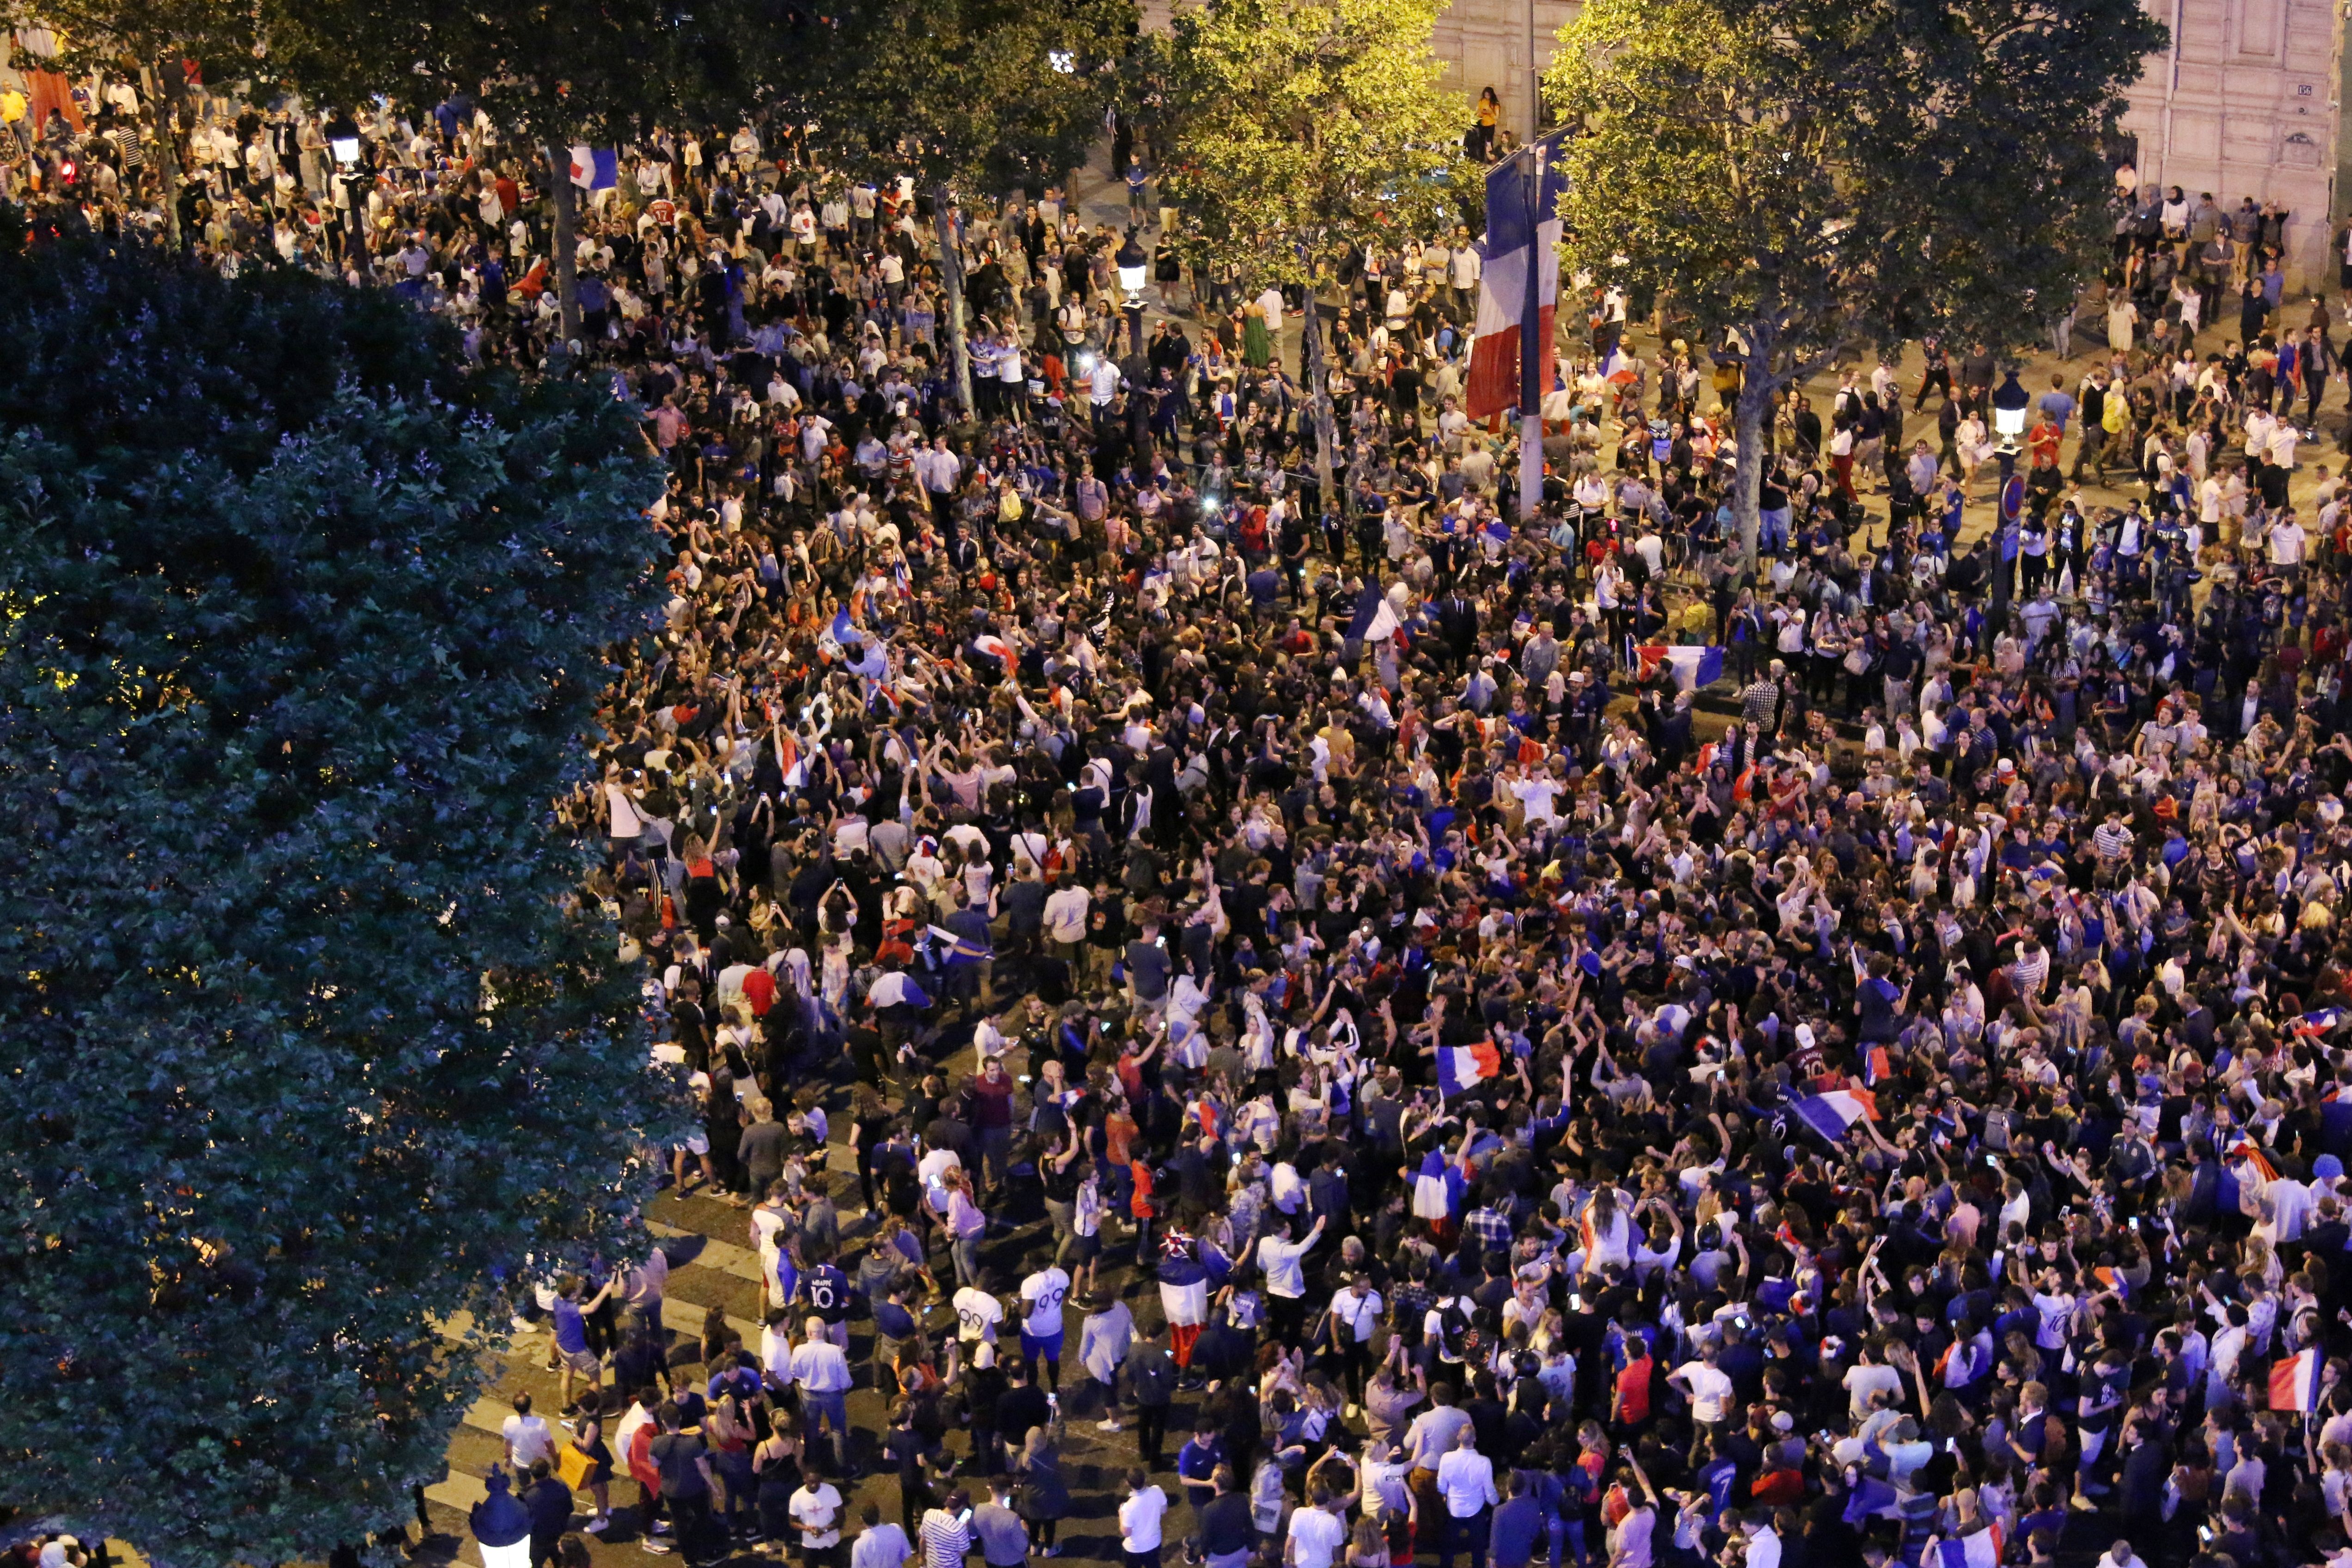 TOPSHOT - People celebrate France's victory on the Champs Elysee in Paris on July 10, 2018, after the final whistle of the Russia 2018 World Cup semi-final football match between France and Belgium. (Photo by ZAKARIA ABDELKAFI / AFP) (Photo credit should read ZAKARIA ABDELKAFI/AFP/Getty Images)